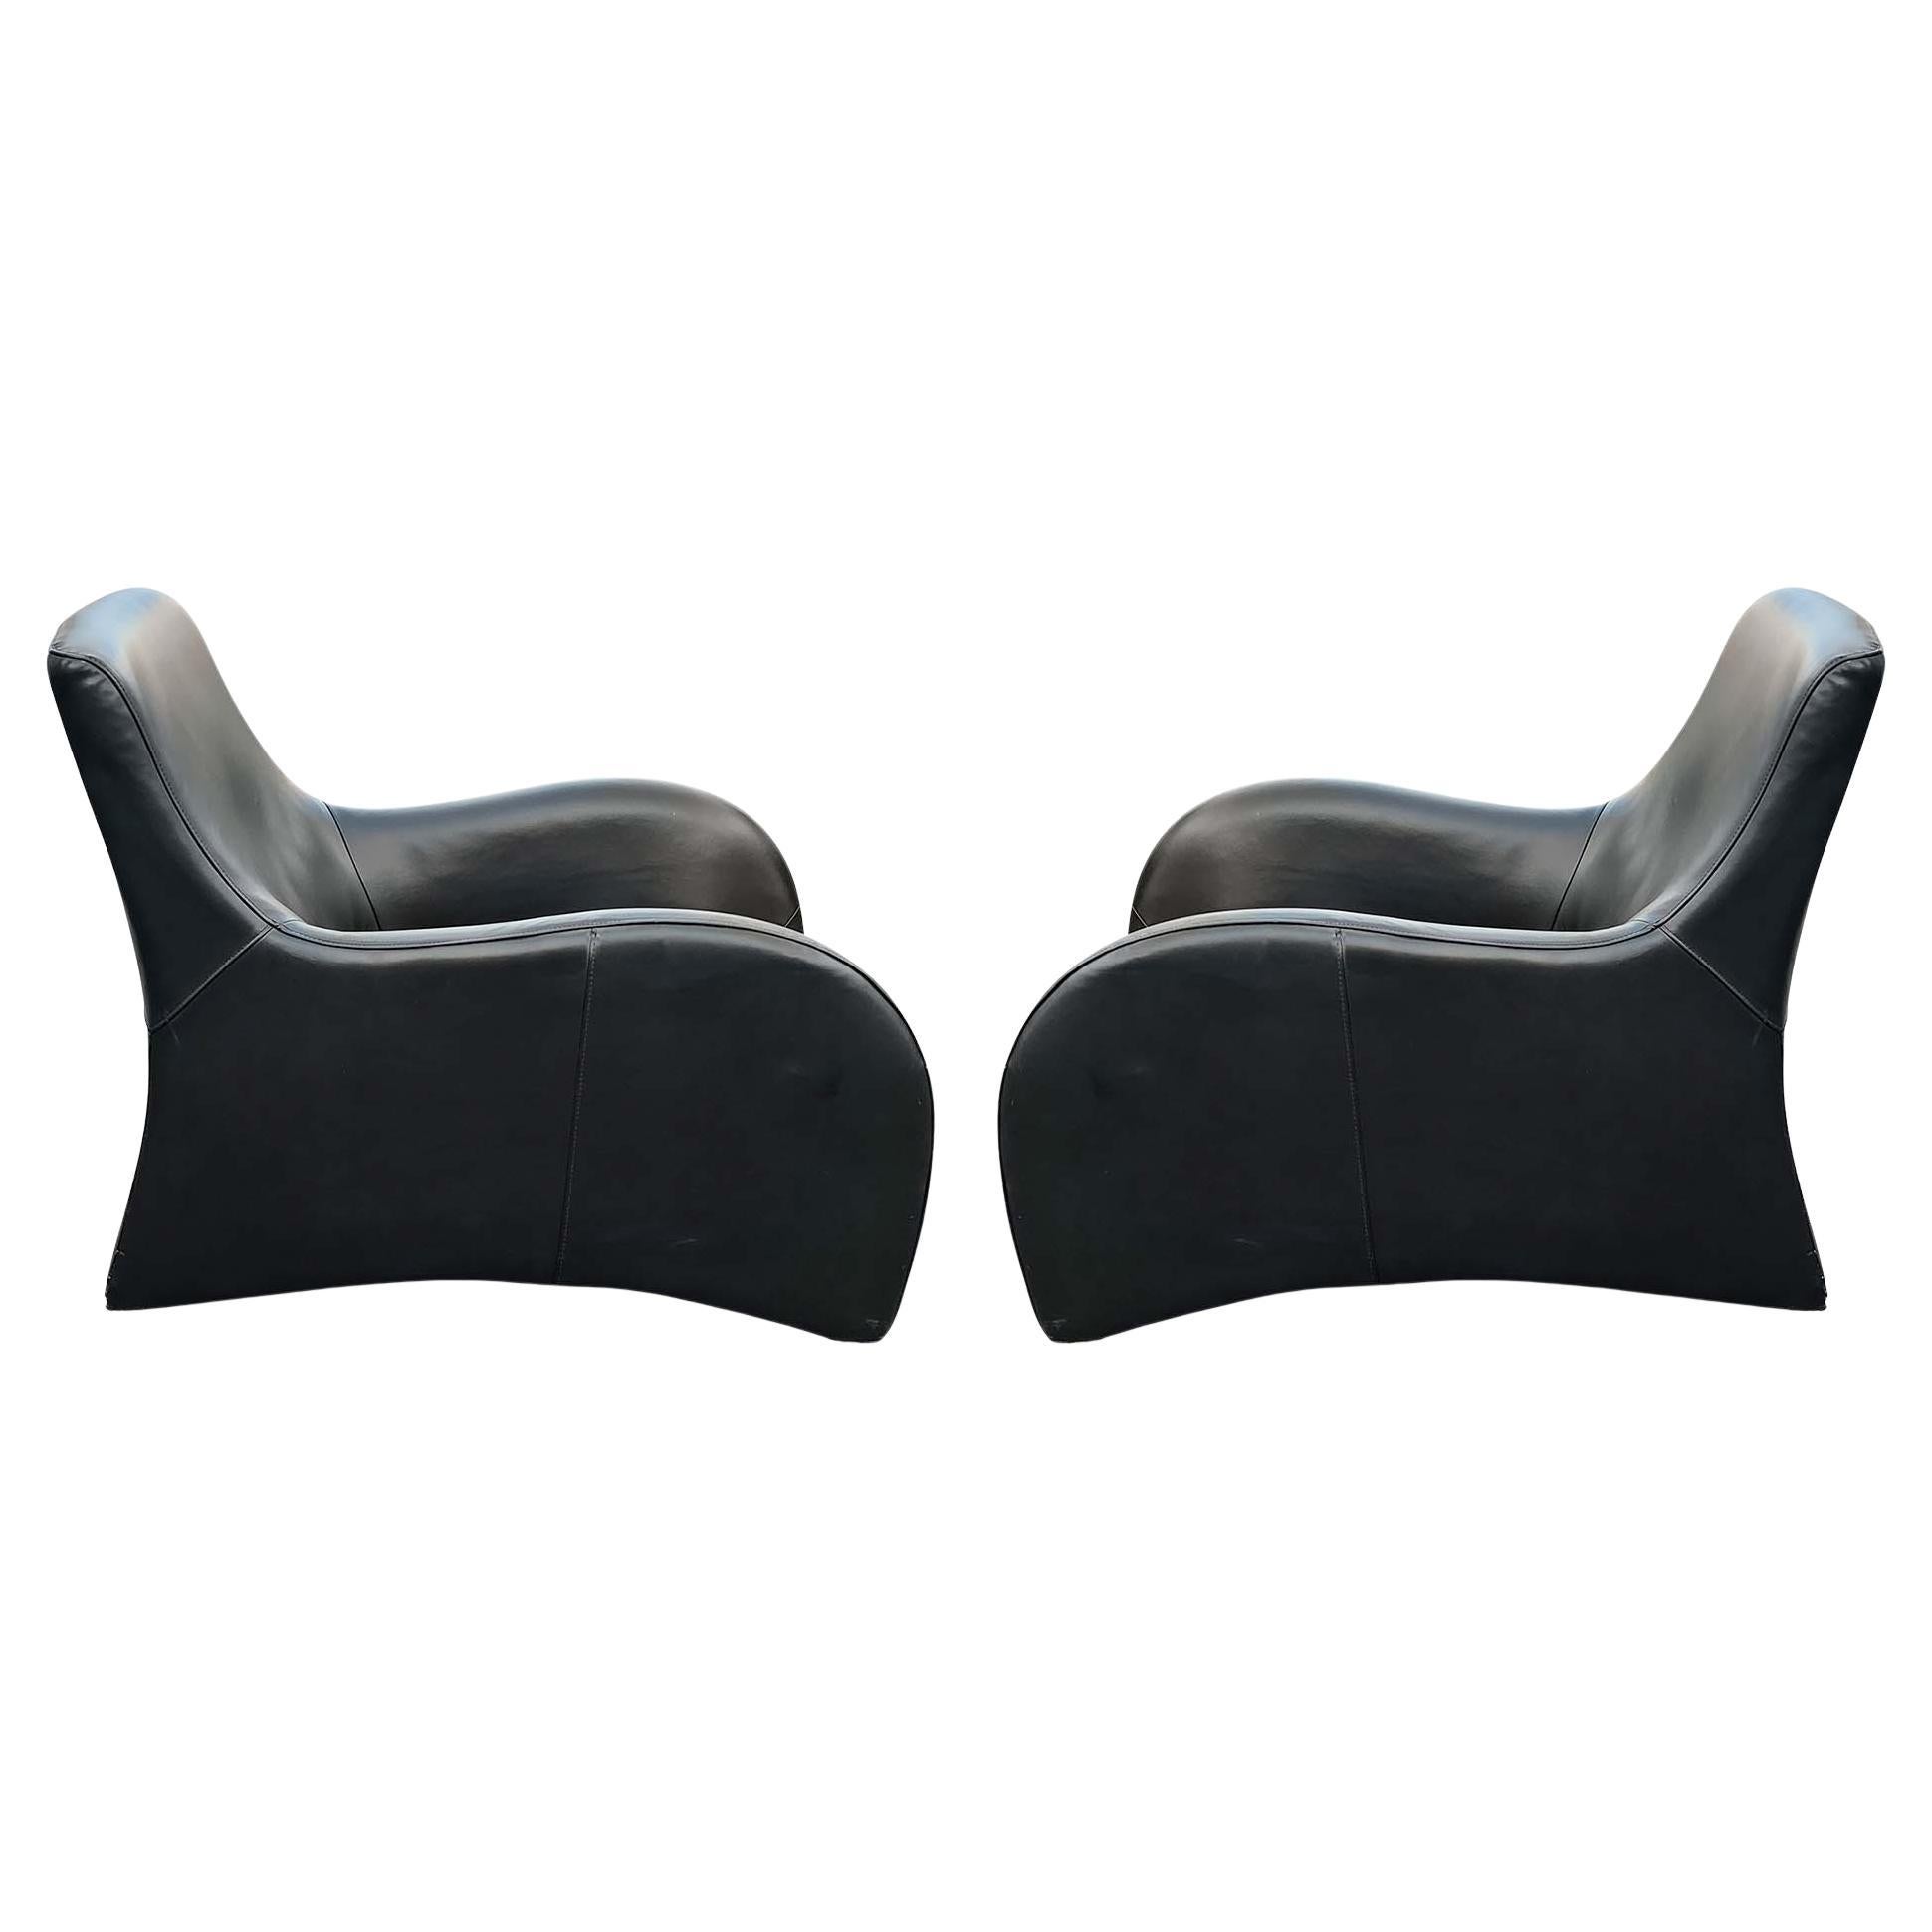 A wildly curvaceous pair of deep seat lounge chairs or club chairs in stitched black leather on discreed crhromed metal feet. These chairs closely resemble the iconic version made famous by Dutch designer Gerard van den Berg for Montis. These are a